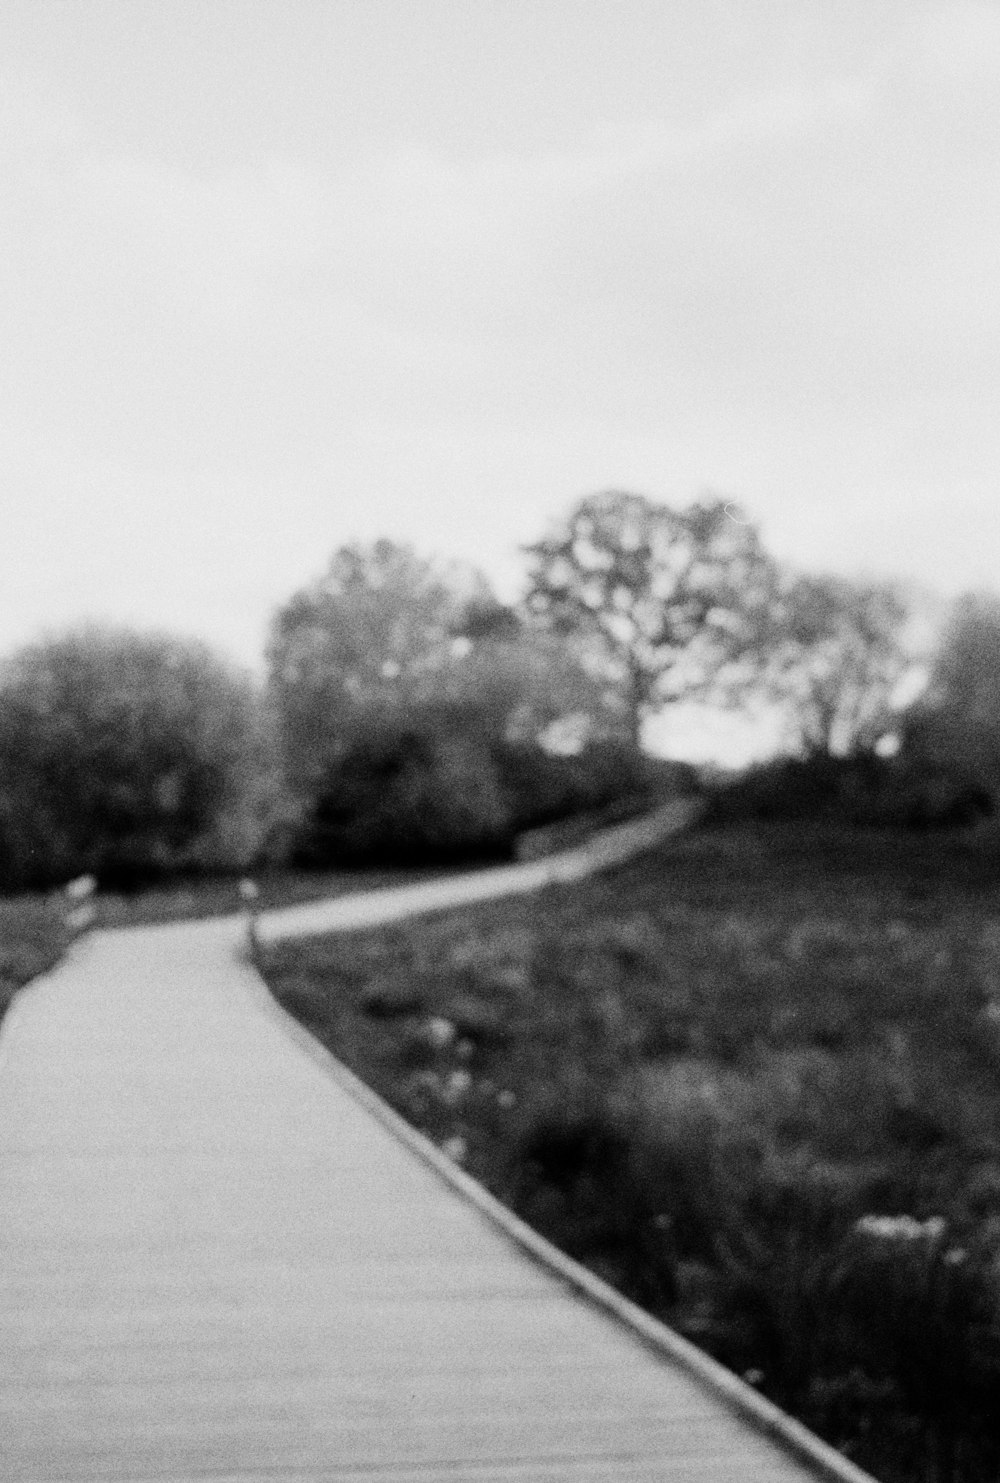 a black and white photo of a path in a park